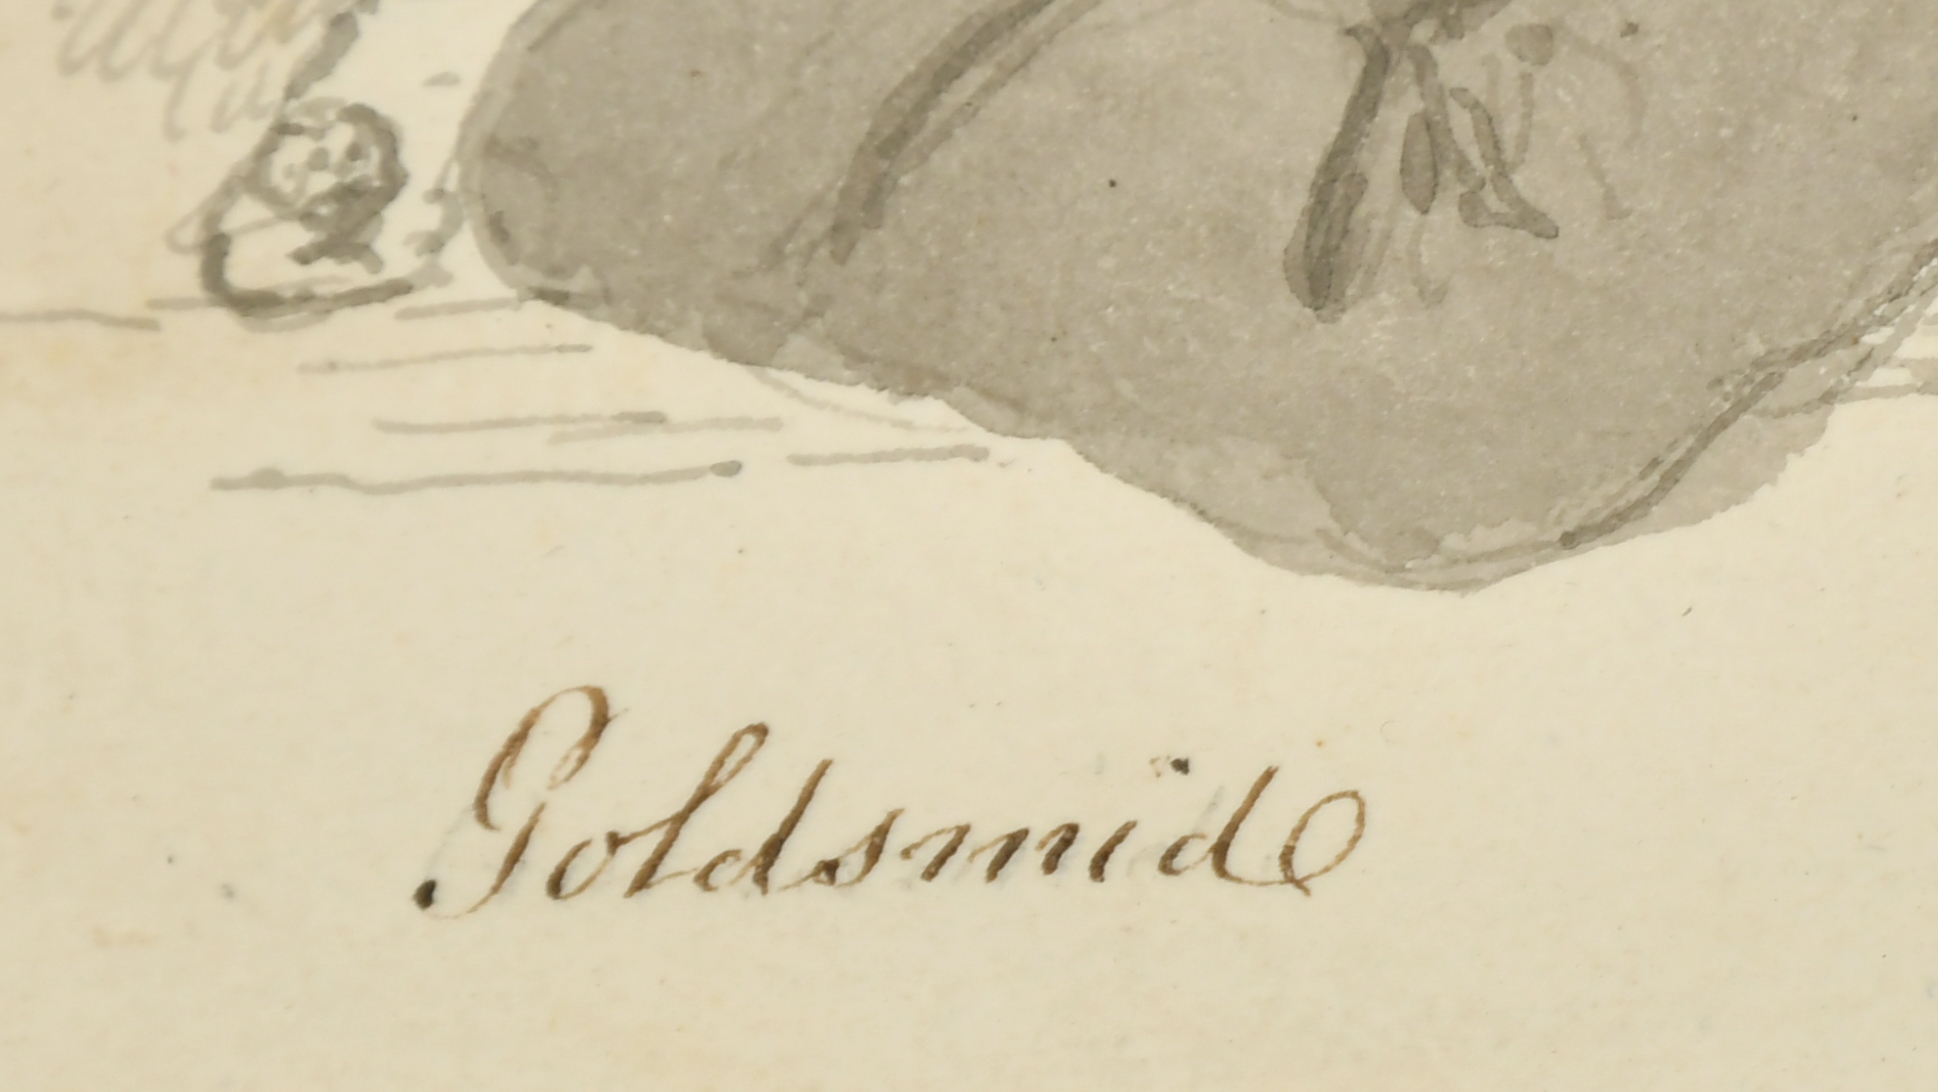 John Nixon (1750-1818) British. "Goldsmidt", Ink and Wash, Inscribed and Numbered 40 in Ink, 5" x 4" - Image 3 of 5